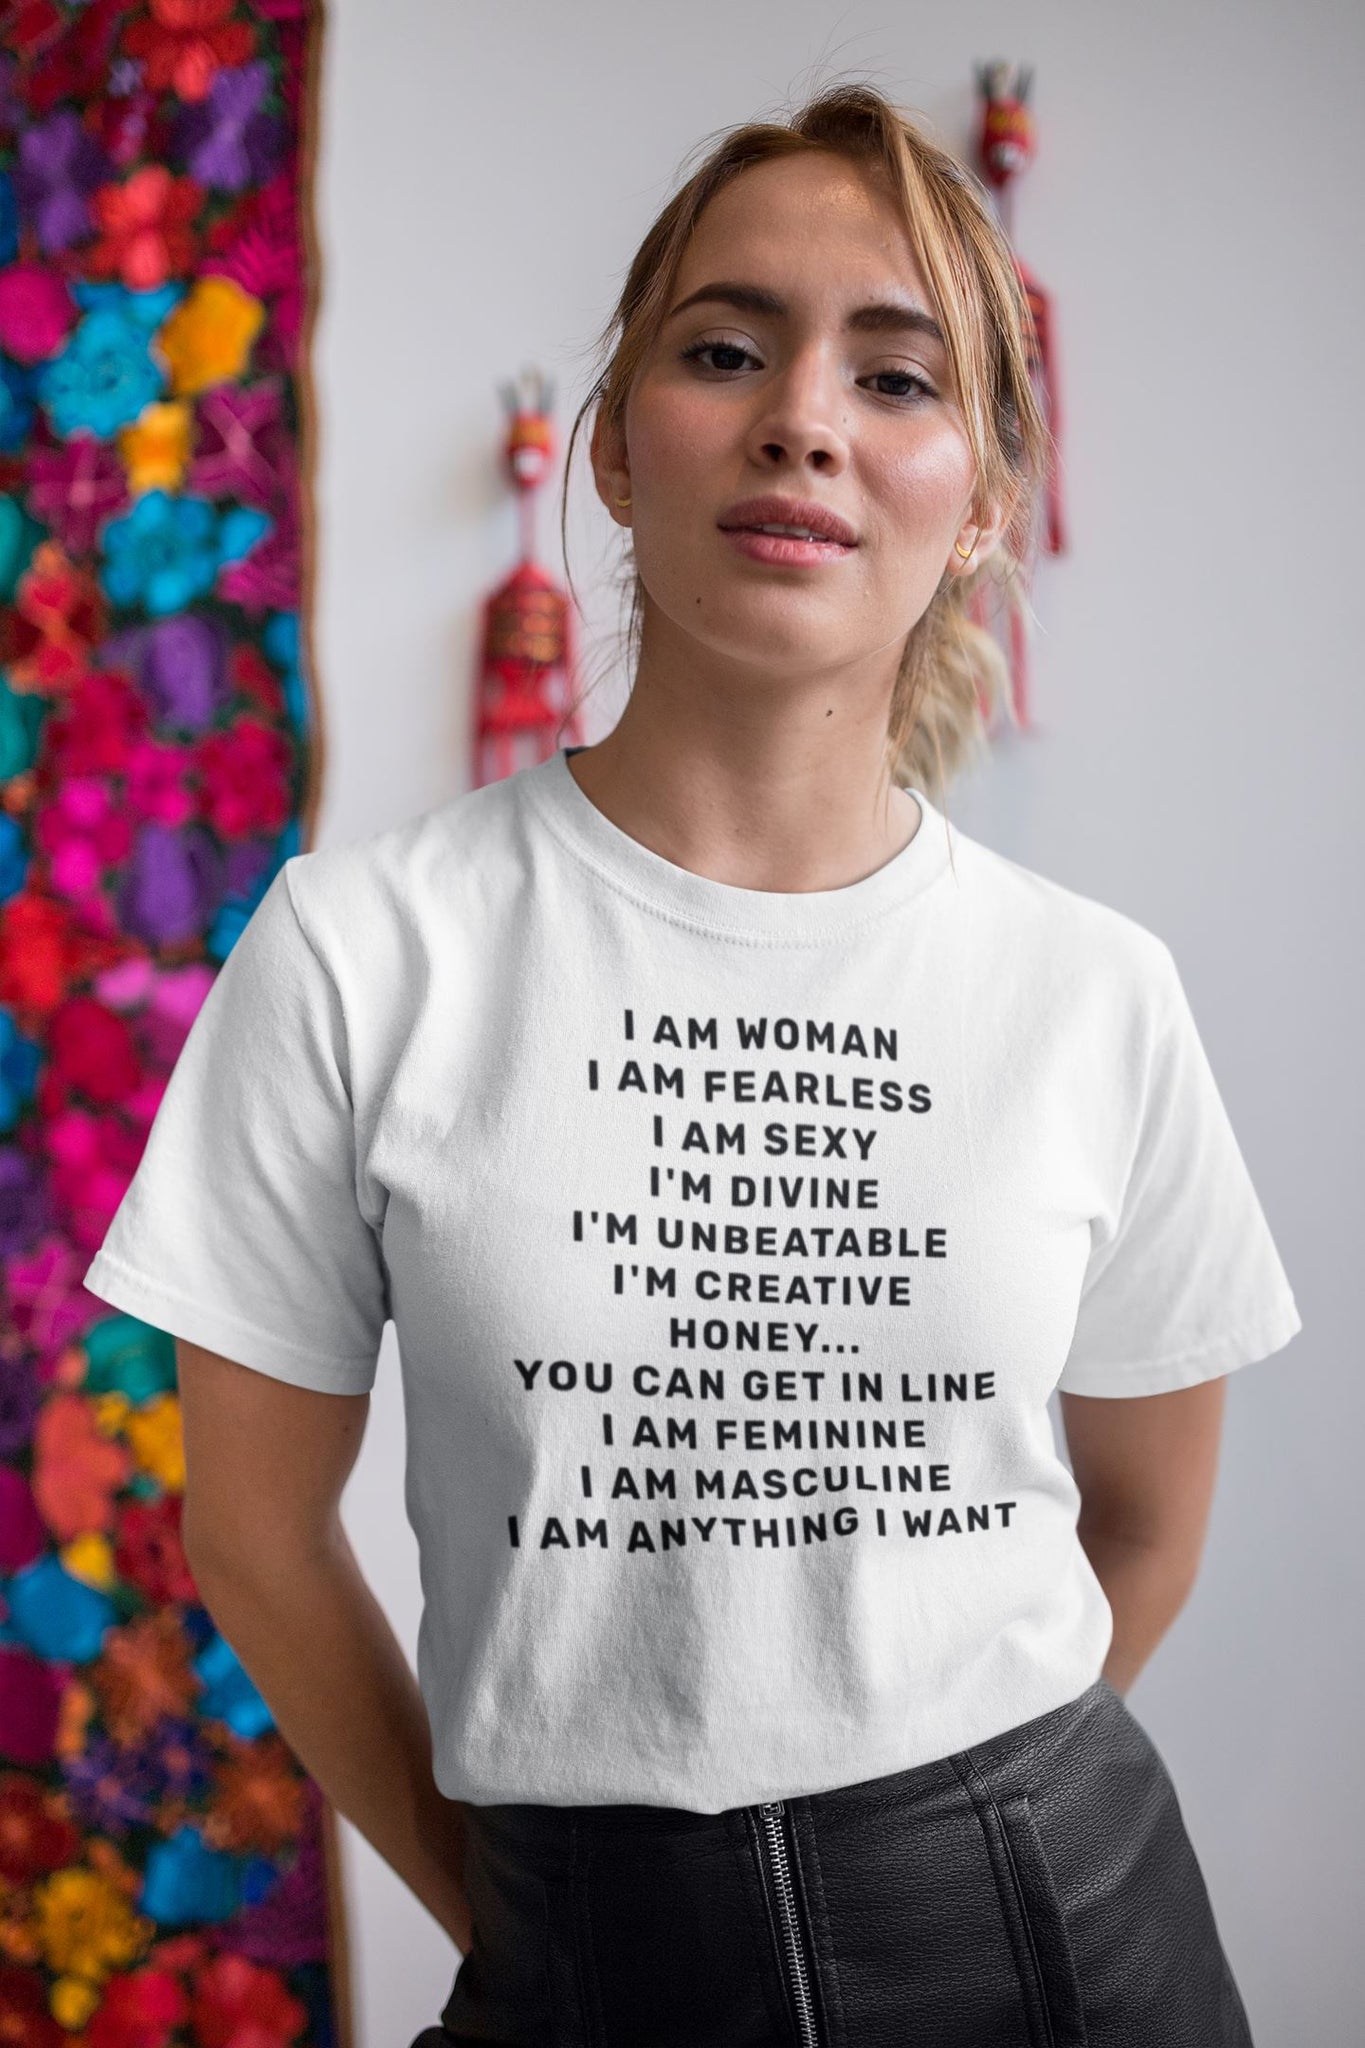 I am Woman Fearless Sexy Divine Special White T Shirt for Women freeshipping - Catch My Drift India